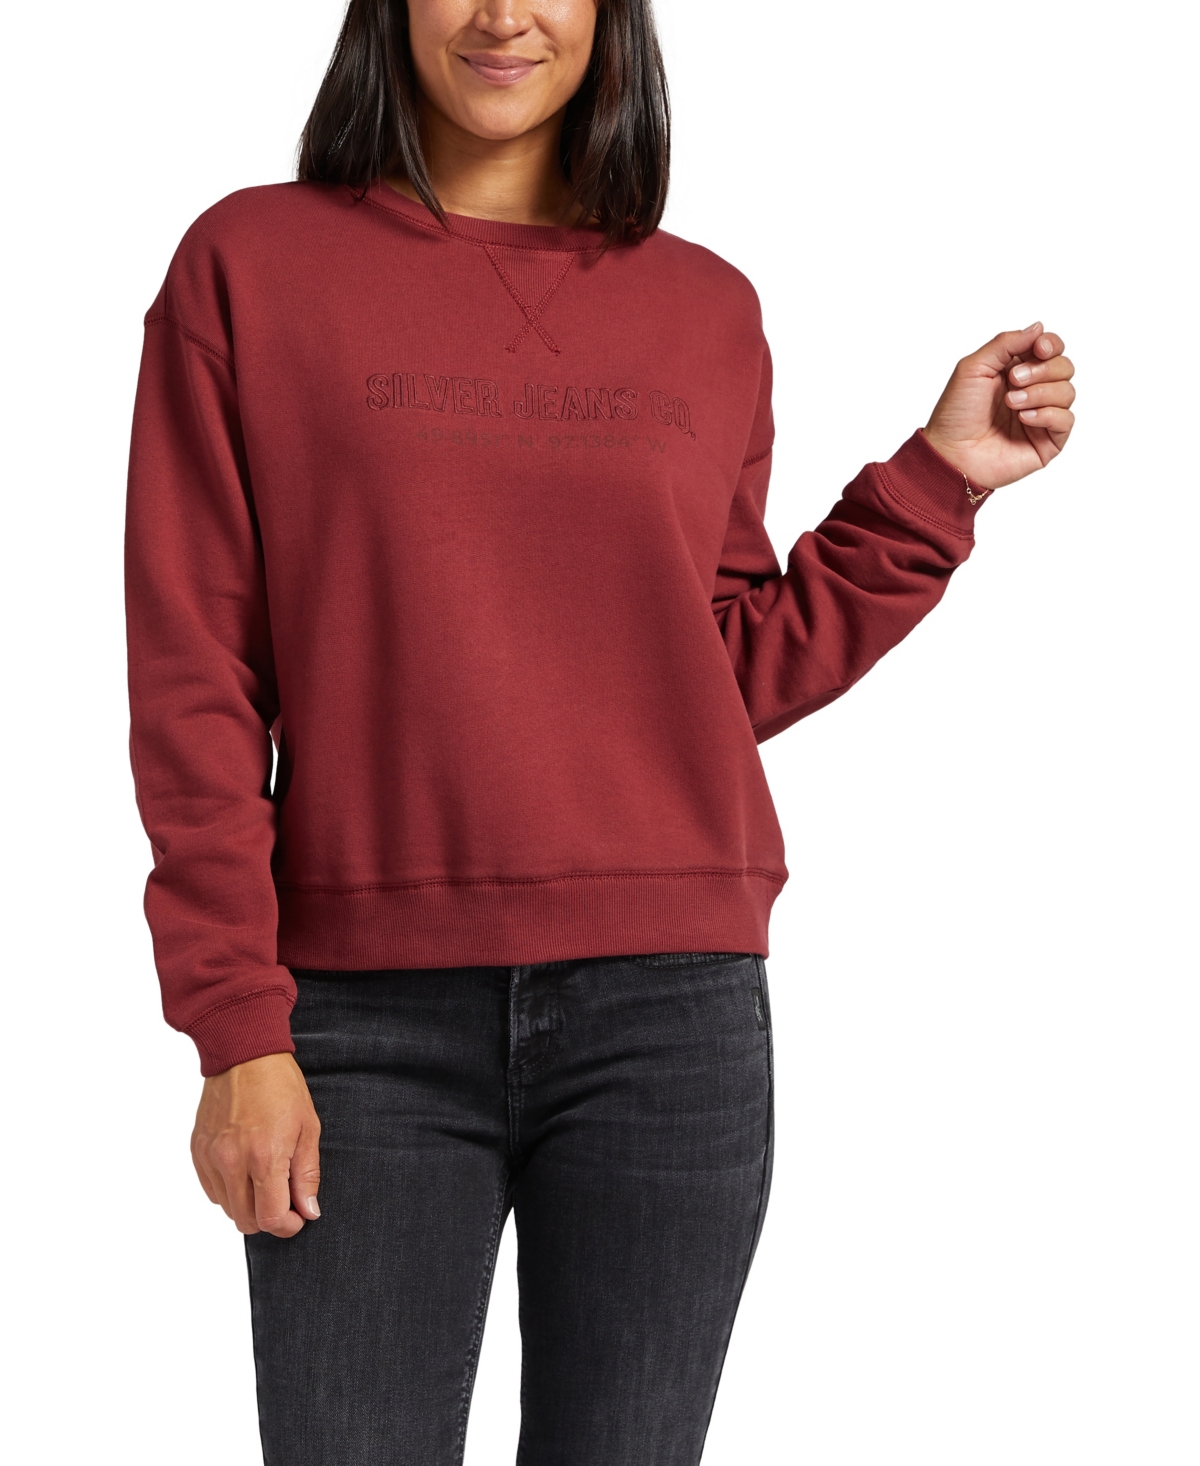 Silver Jeans Co. Women's Cotton Crewneck Embroidered Sweatshirt In Burgundy